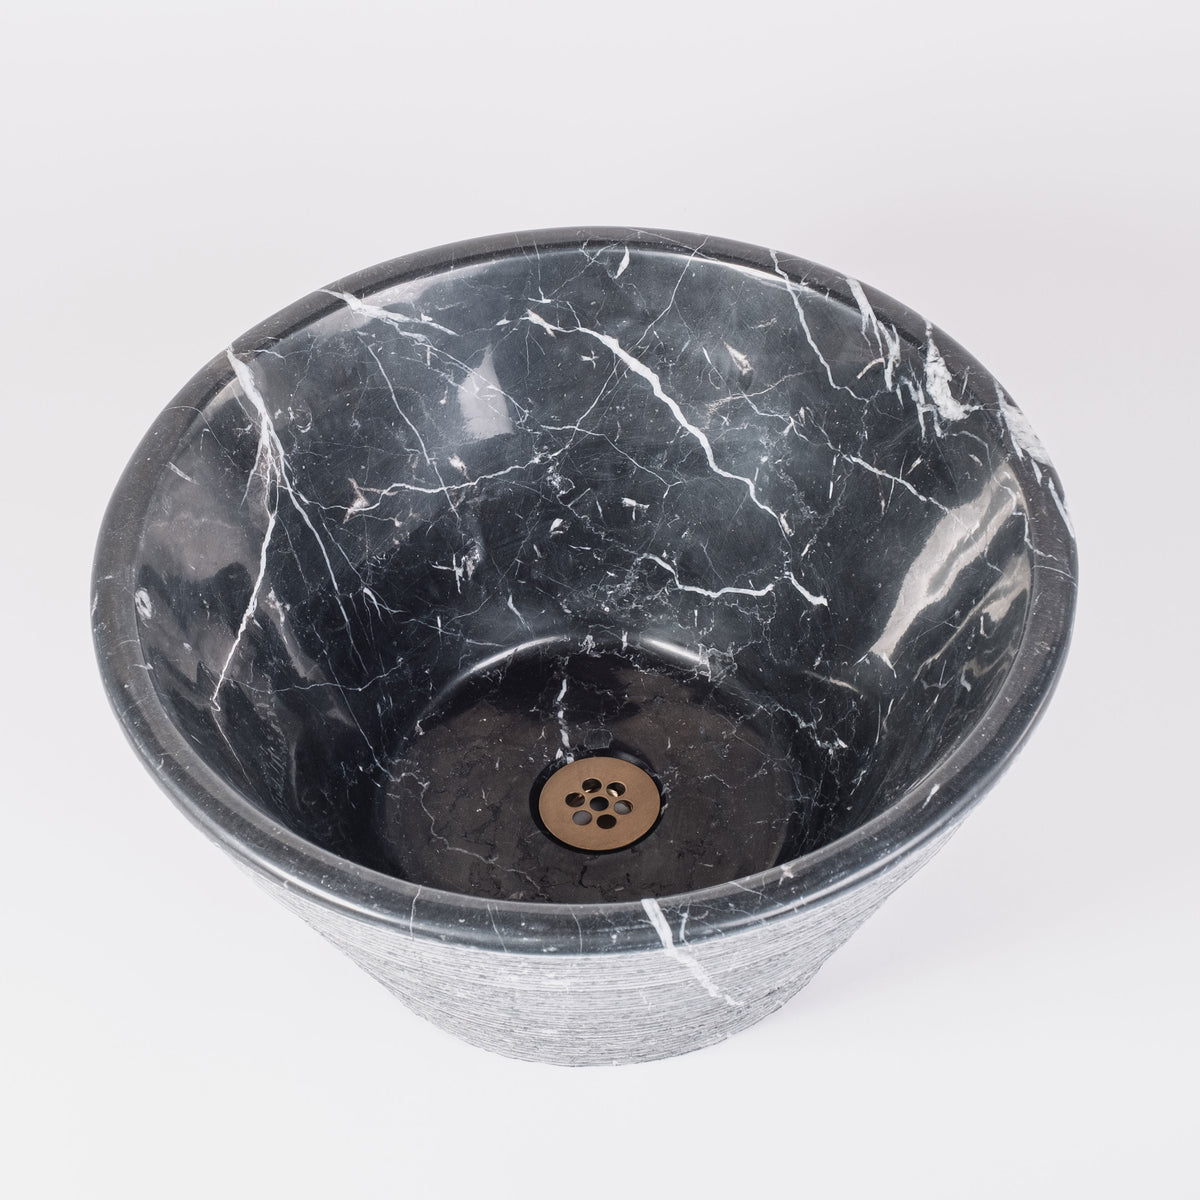 Stone Forest Cono Vessel Sink carved from Nero Marquina image 3 of 3